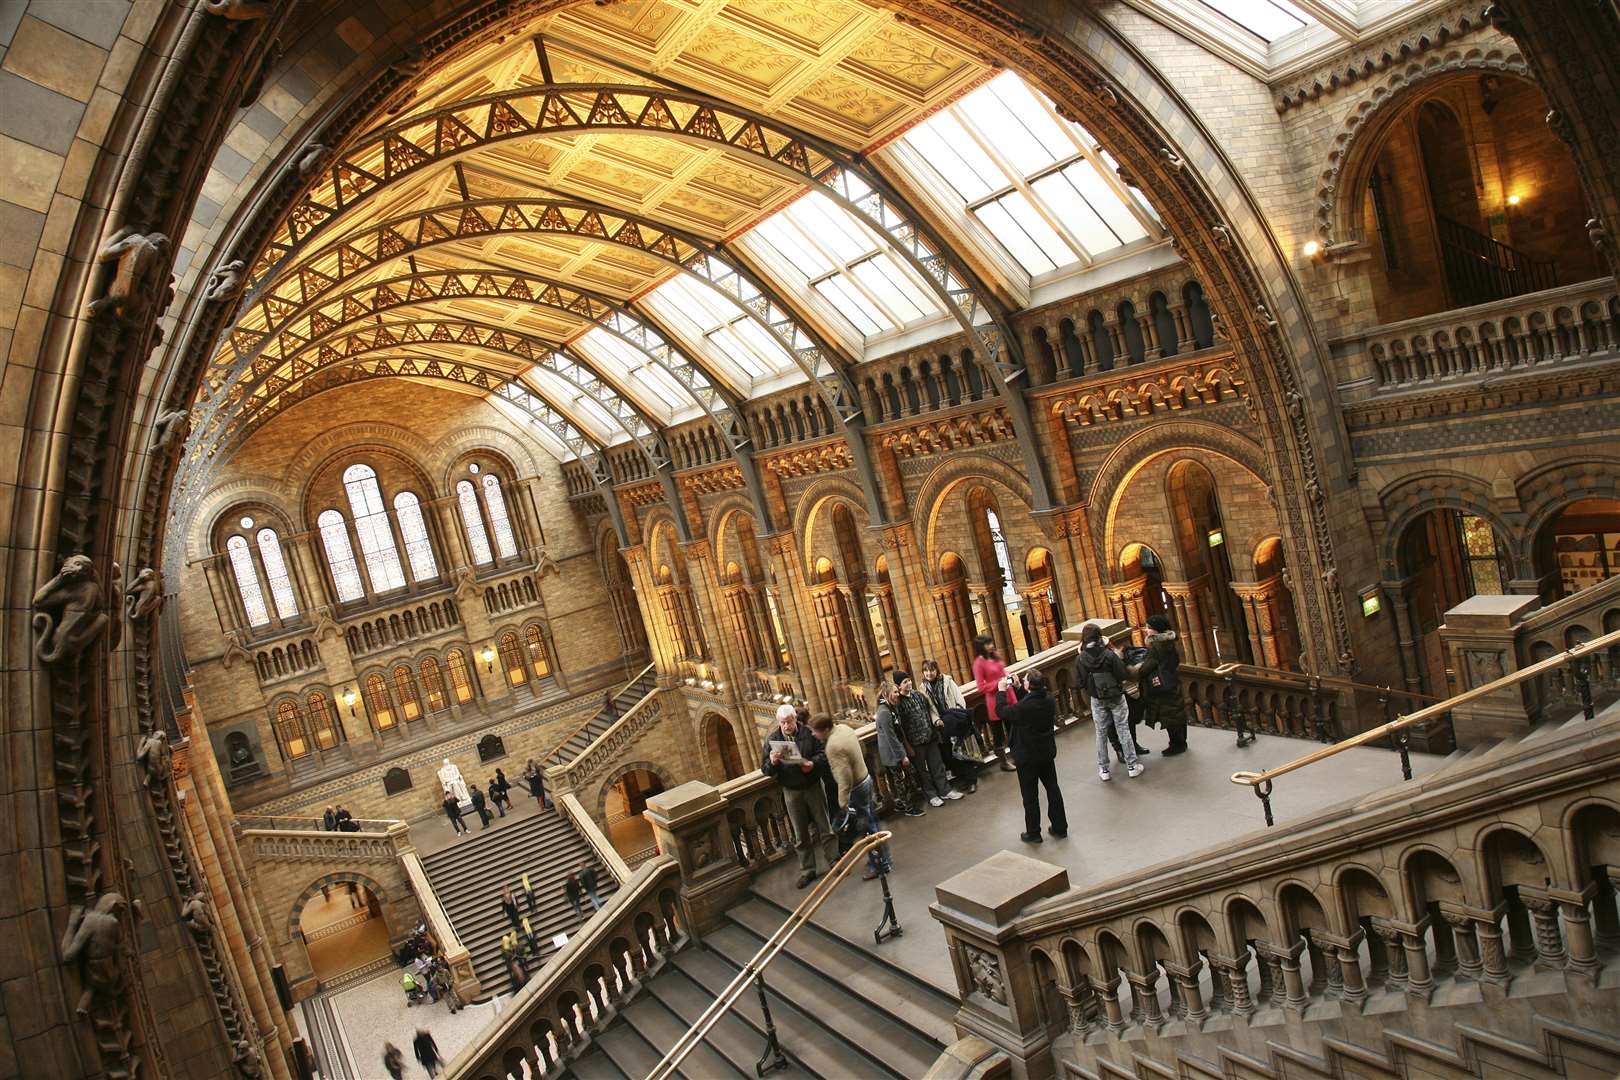 The Natural History Museum is a must